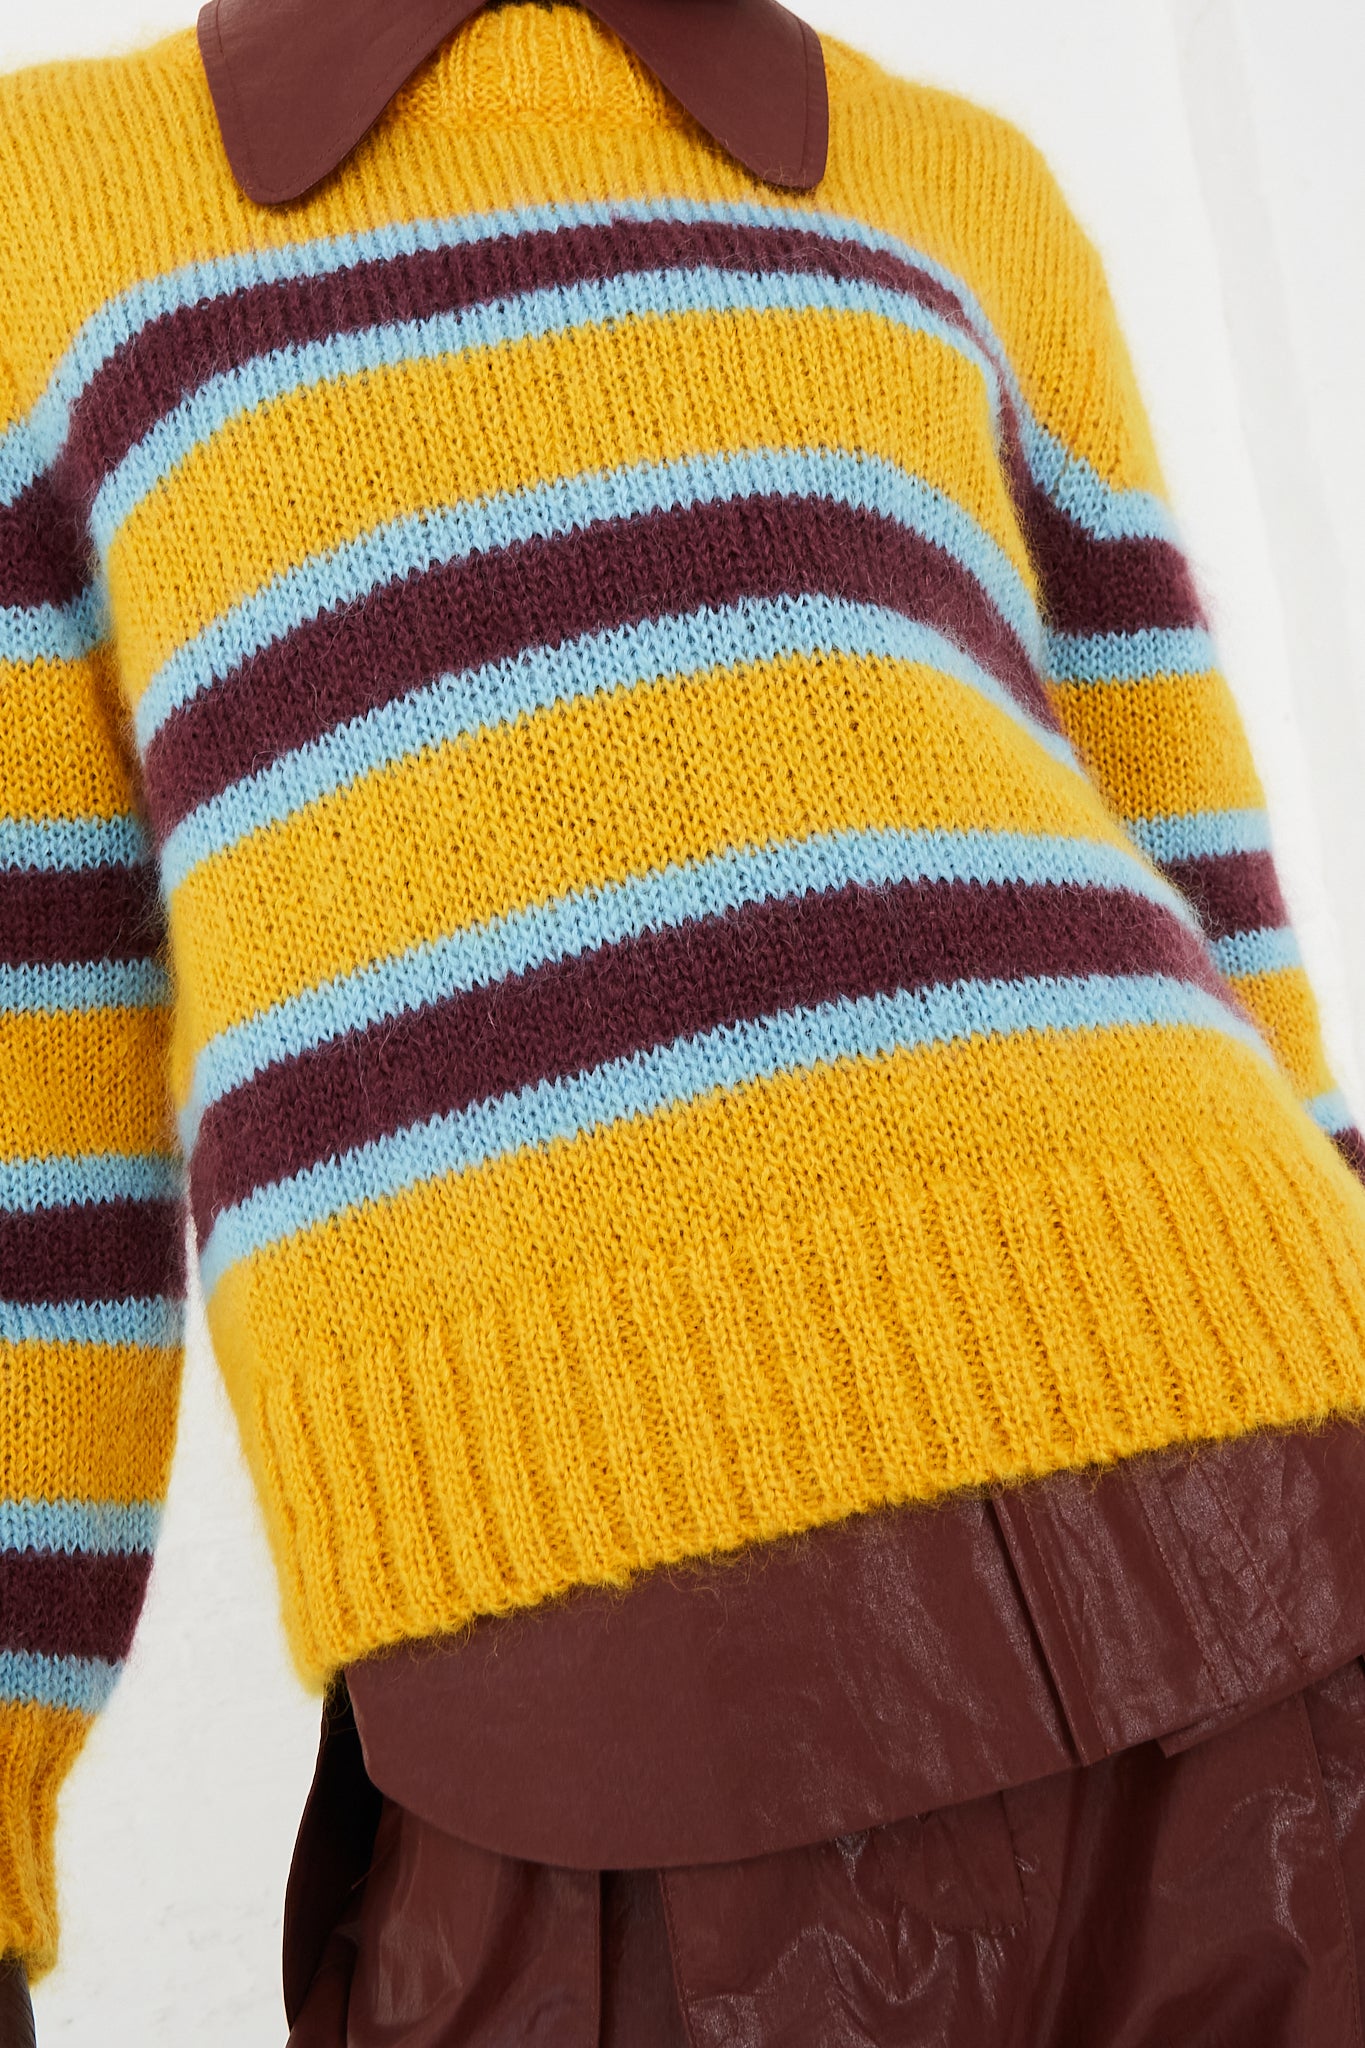 CARON CALLAHAN - Mohair Fletcher Sweater in Canary Stripe | Oroboro Store | Front Upclose